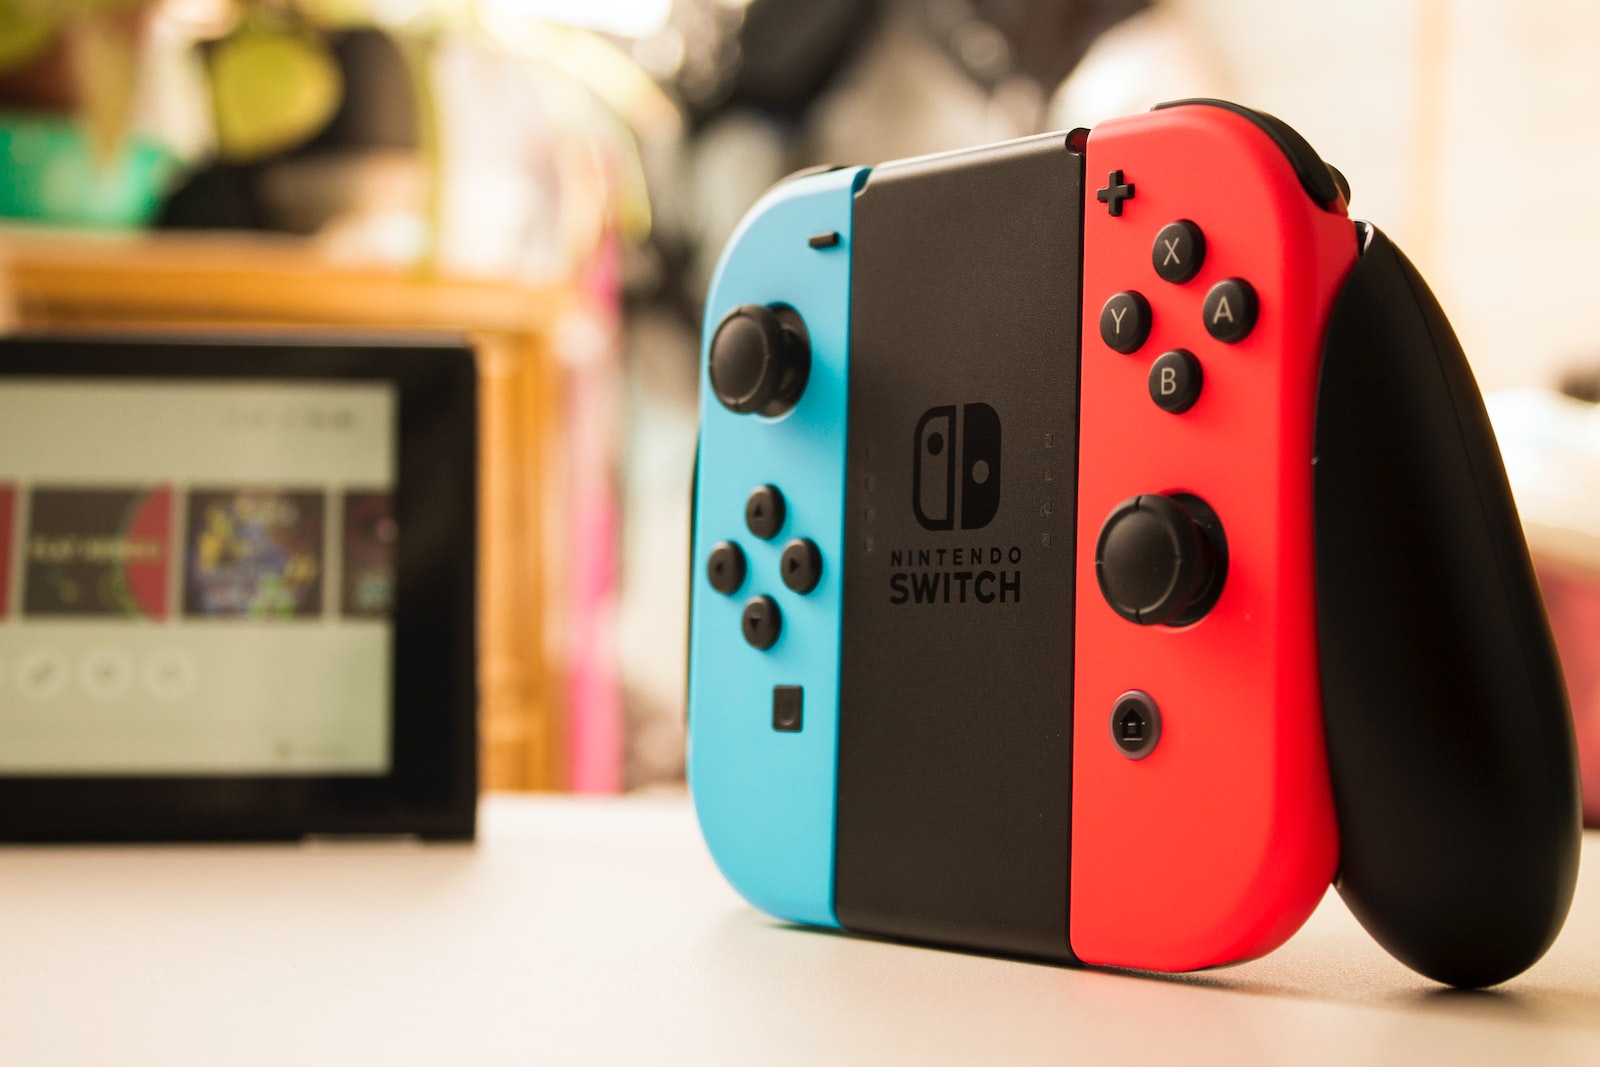 The Nintendo Switch : the best console for the family